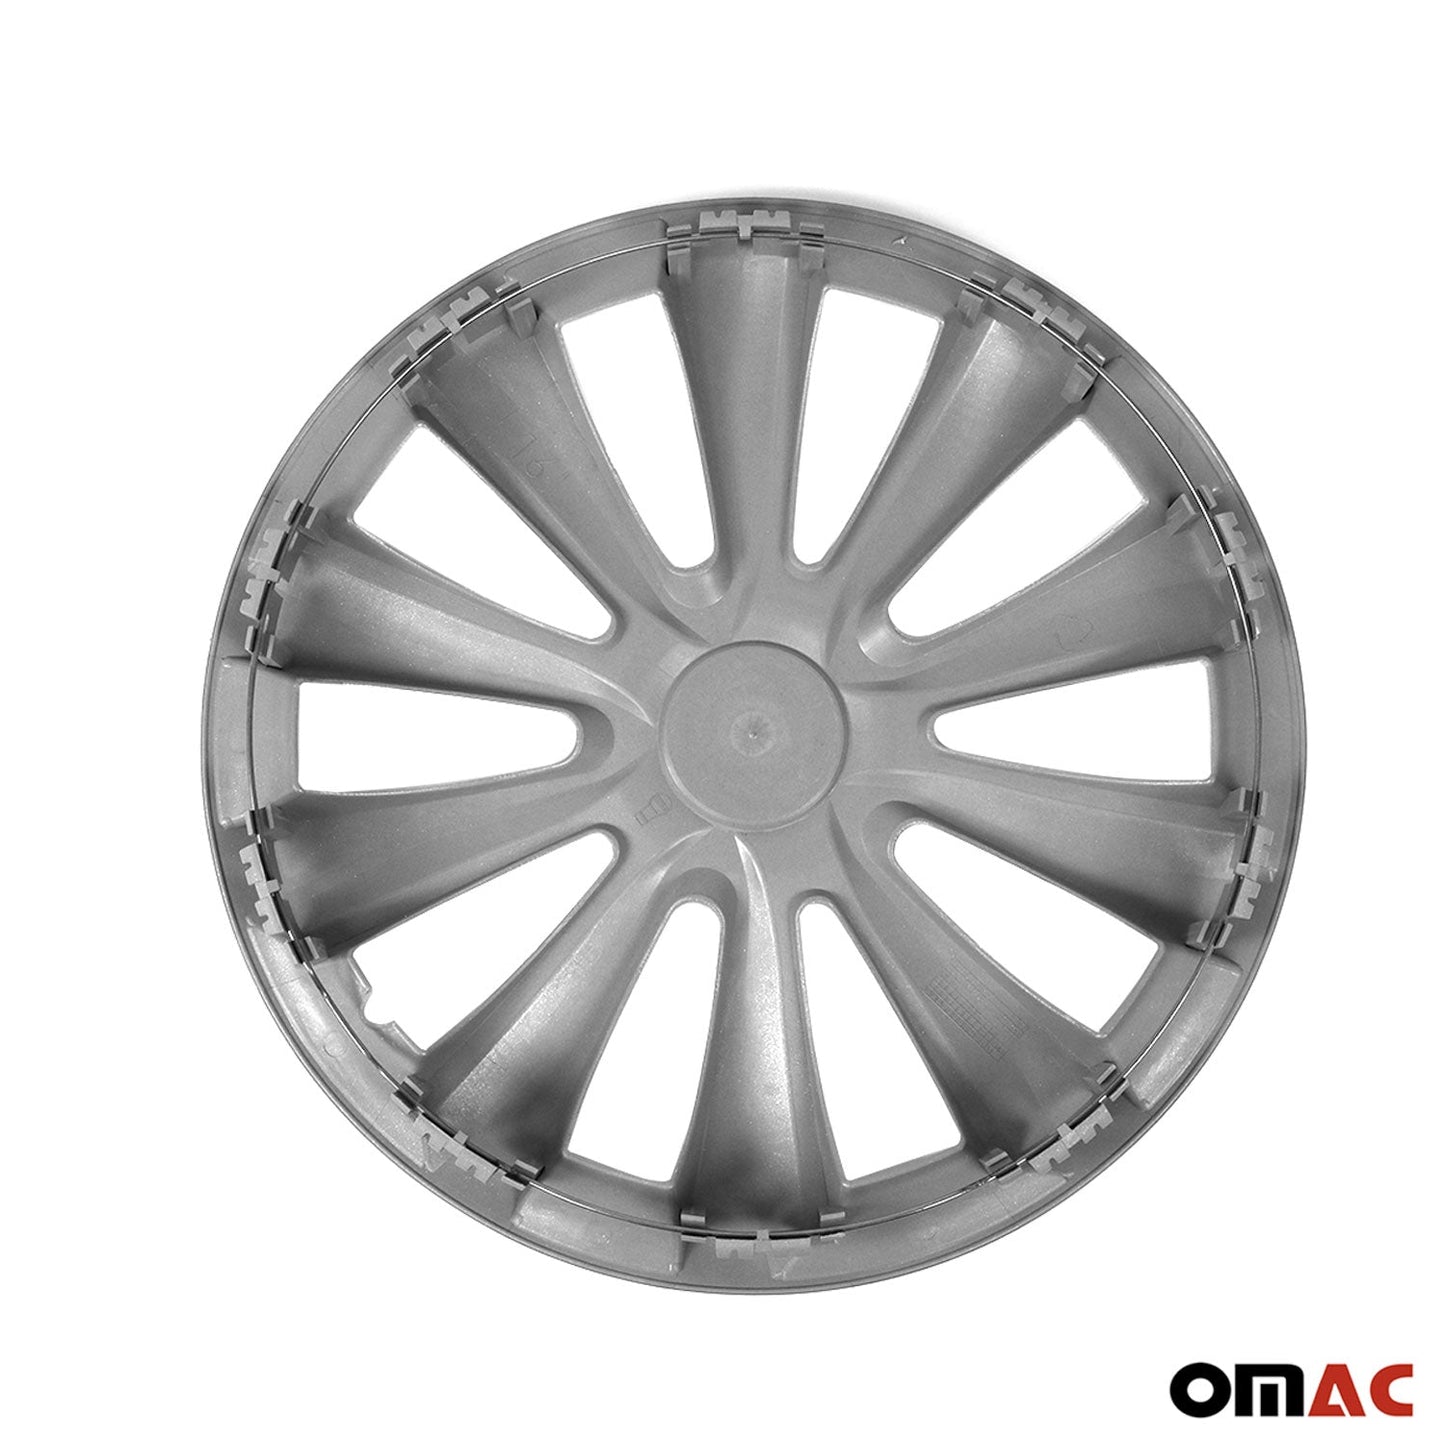 OMAC 16 Inch Wheel Covers Hubcaps for Jeep Silver Gray Gloss G002341